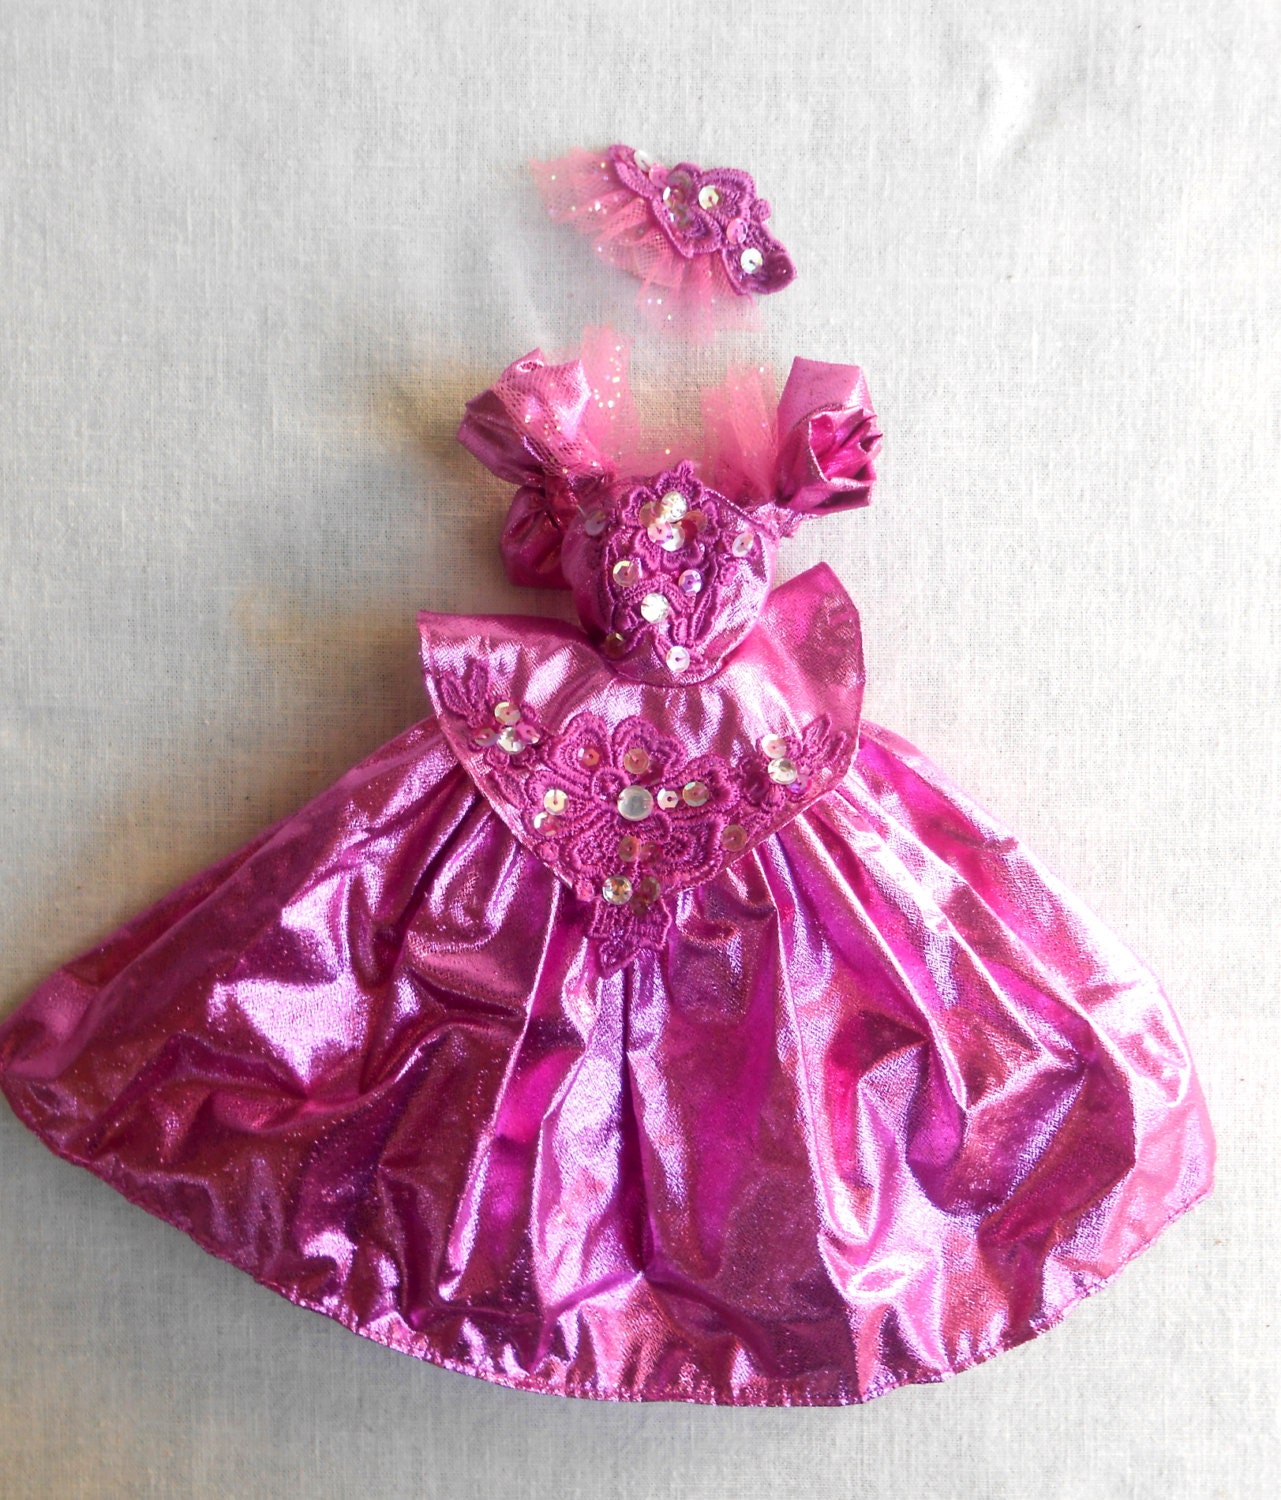 Barbie Pink Gown with Sequins anf Lace.